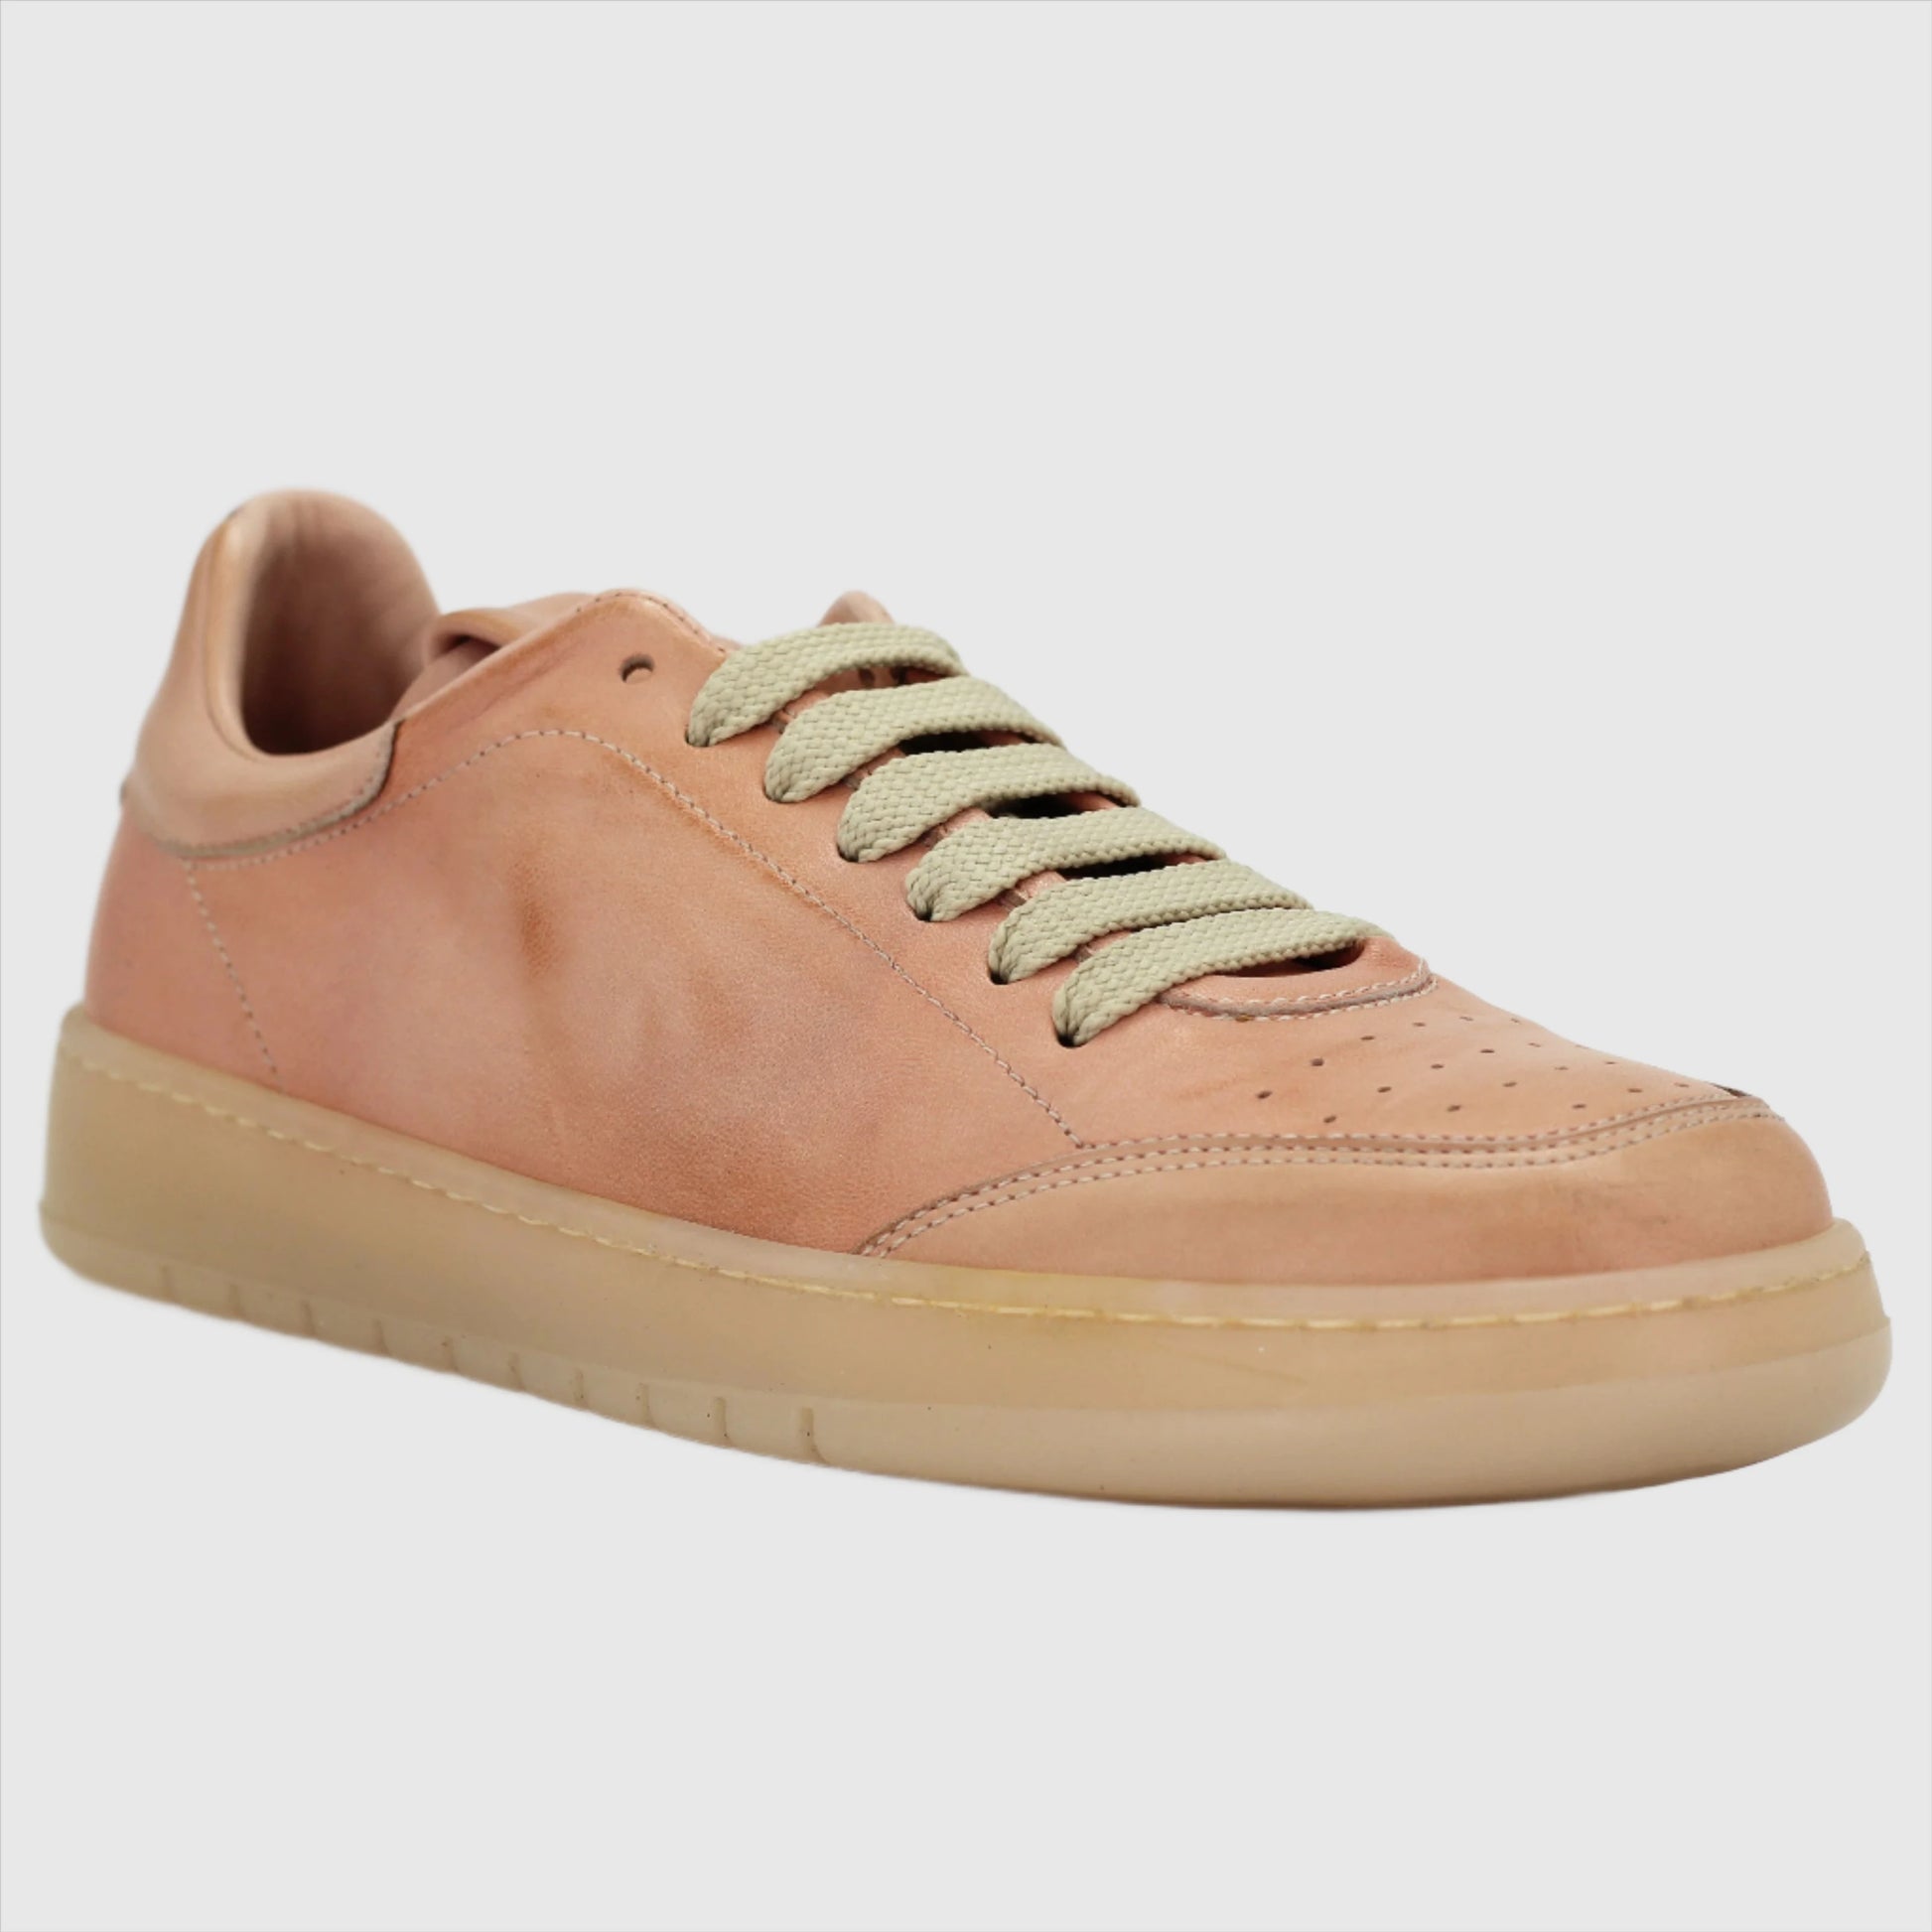 Shop Handmade Italian Leather Sneaker in Rosa (GRD704/2) or browse our range of hand-made Italian shoes in leather or suede in-store at Aliverti Cape Town, or shop online. We deliver in South Africa & offer multiple payment plans as well as accept multiple safe & secure payment methods.